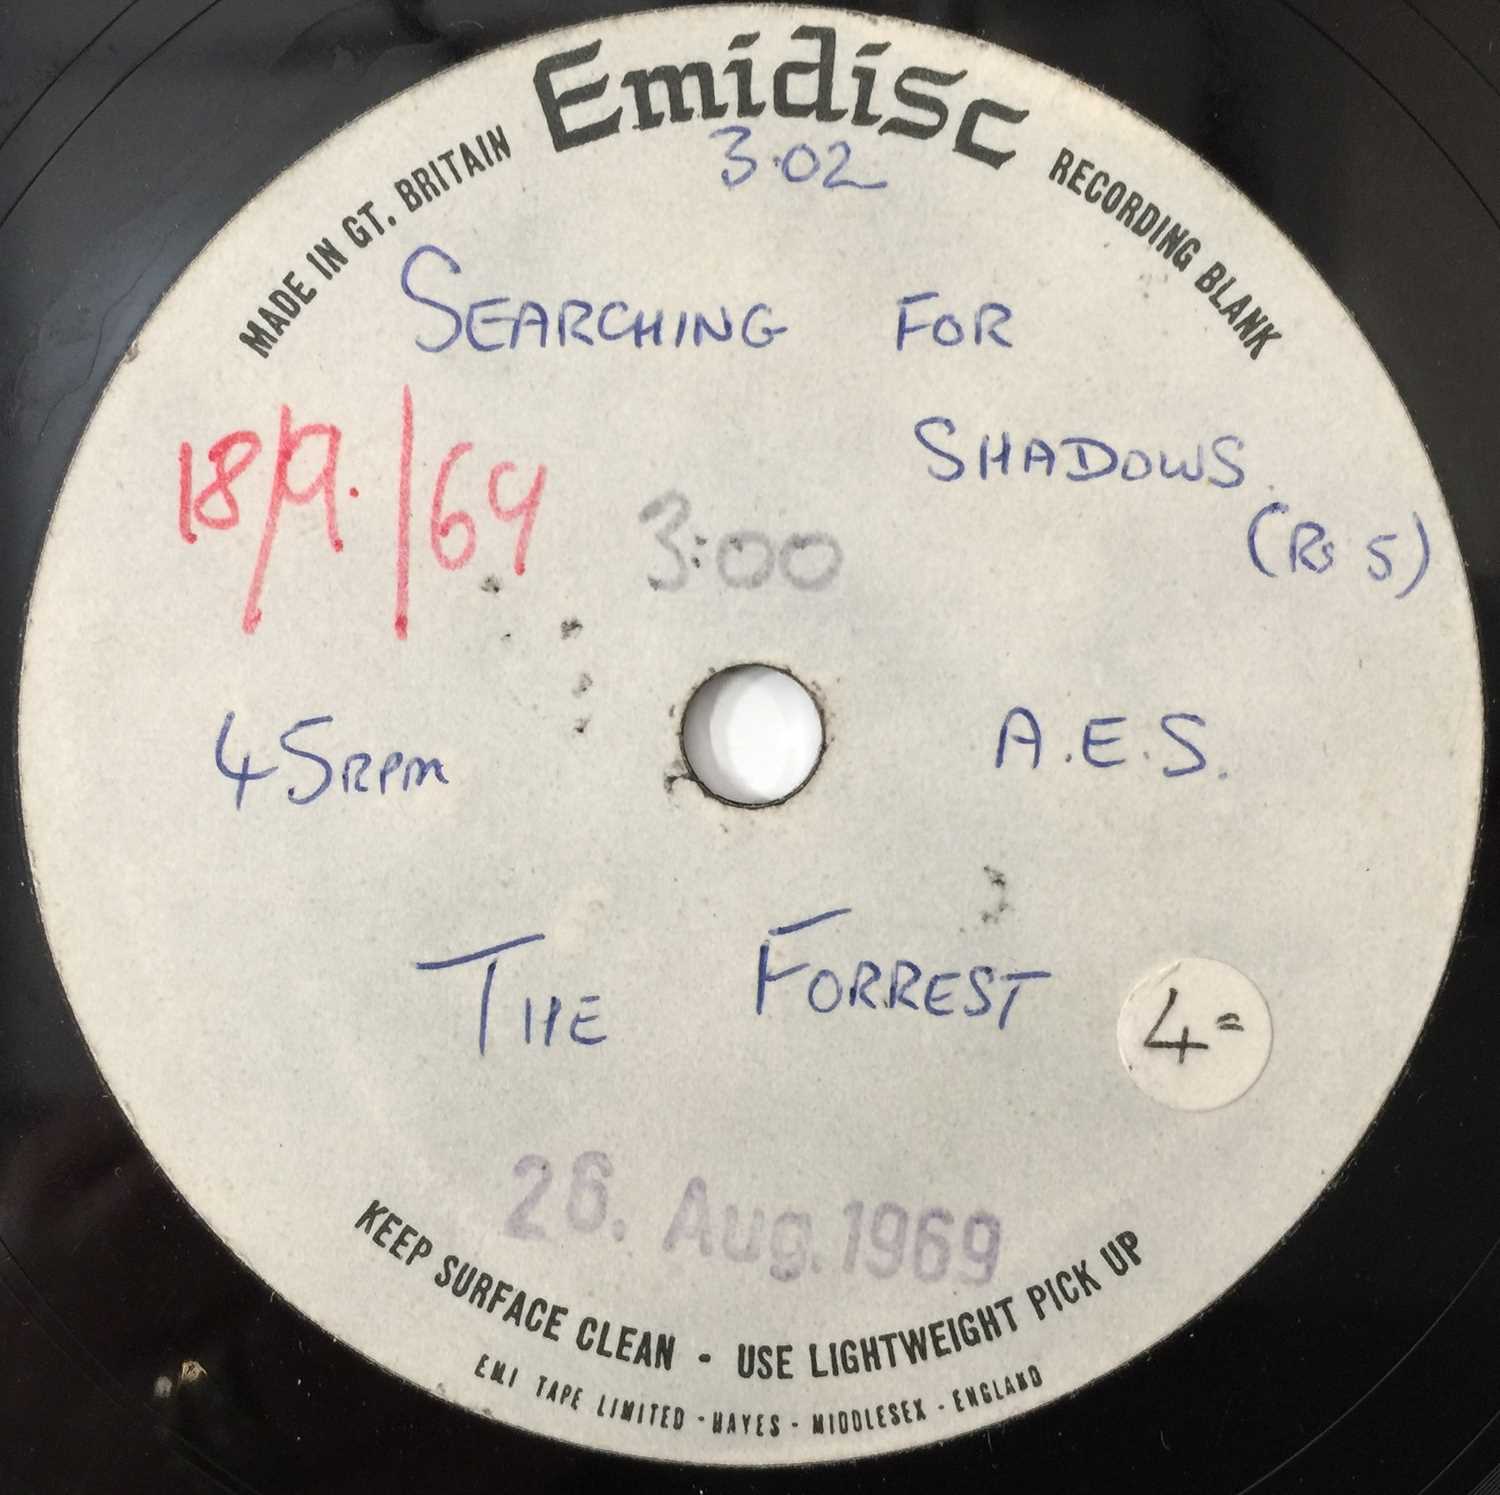 THE FOREST - SEARCHING FOR SHADOWS 7" (S/ SIDED ACETATE) - Image 2 of 2